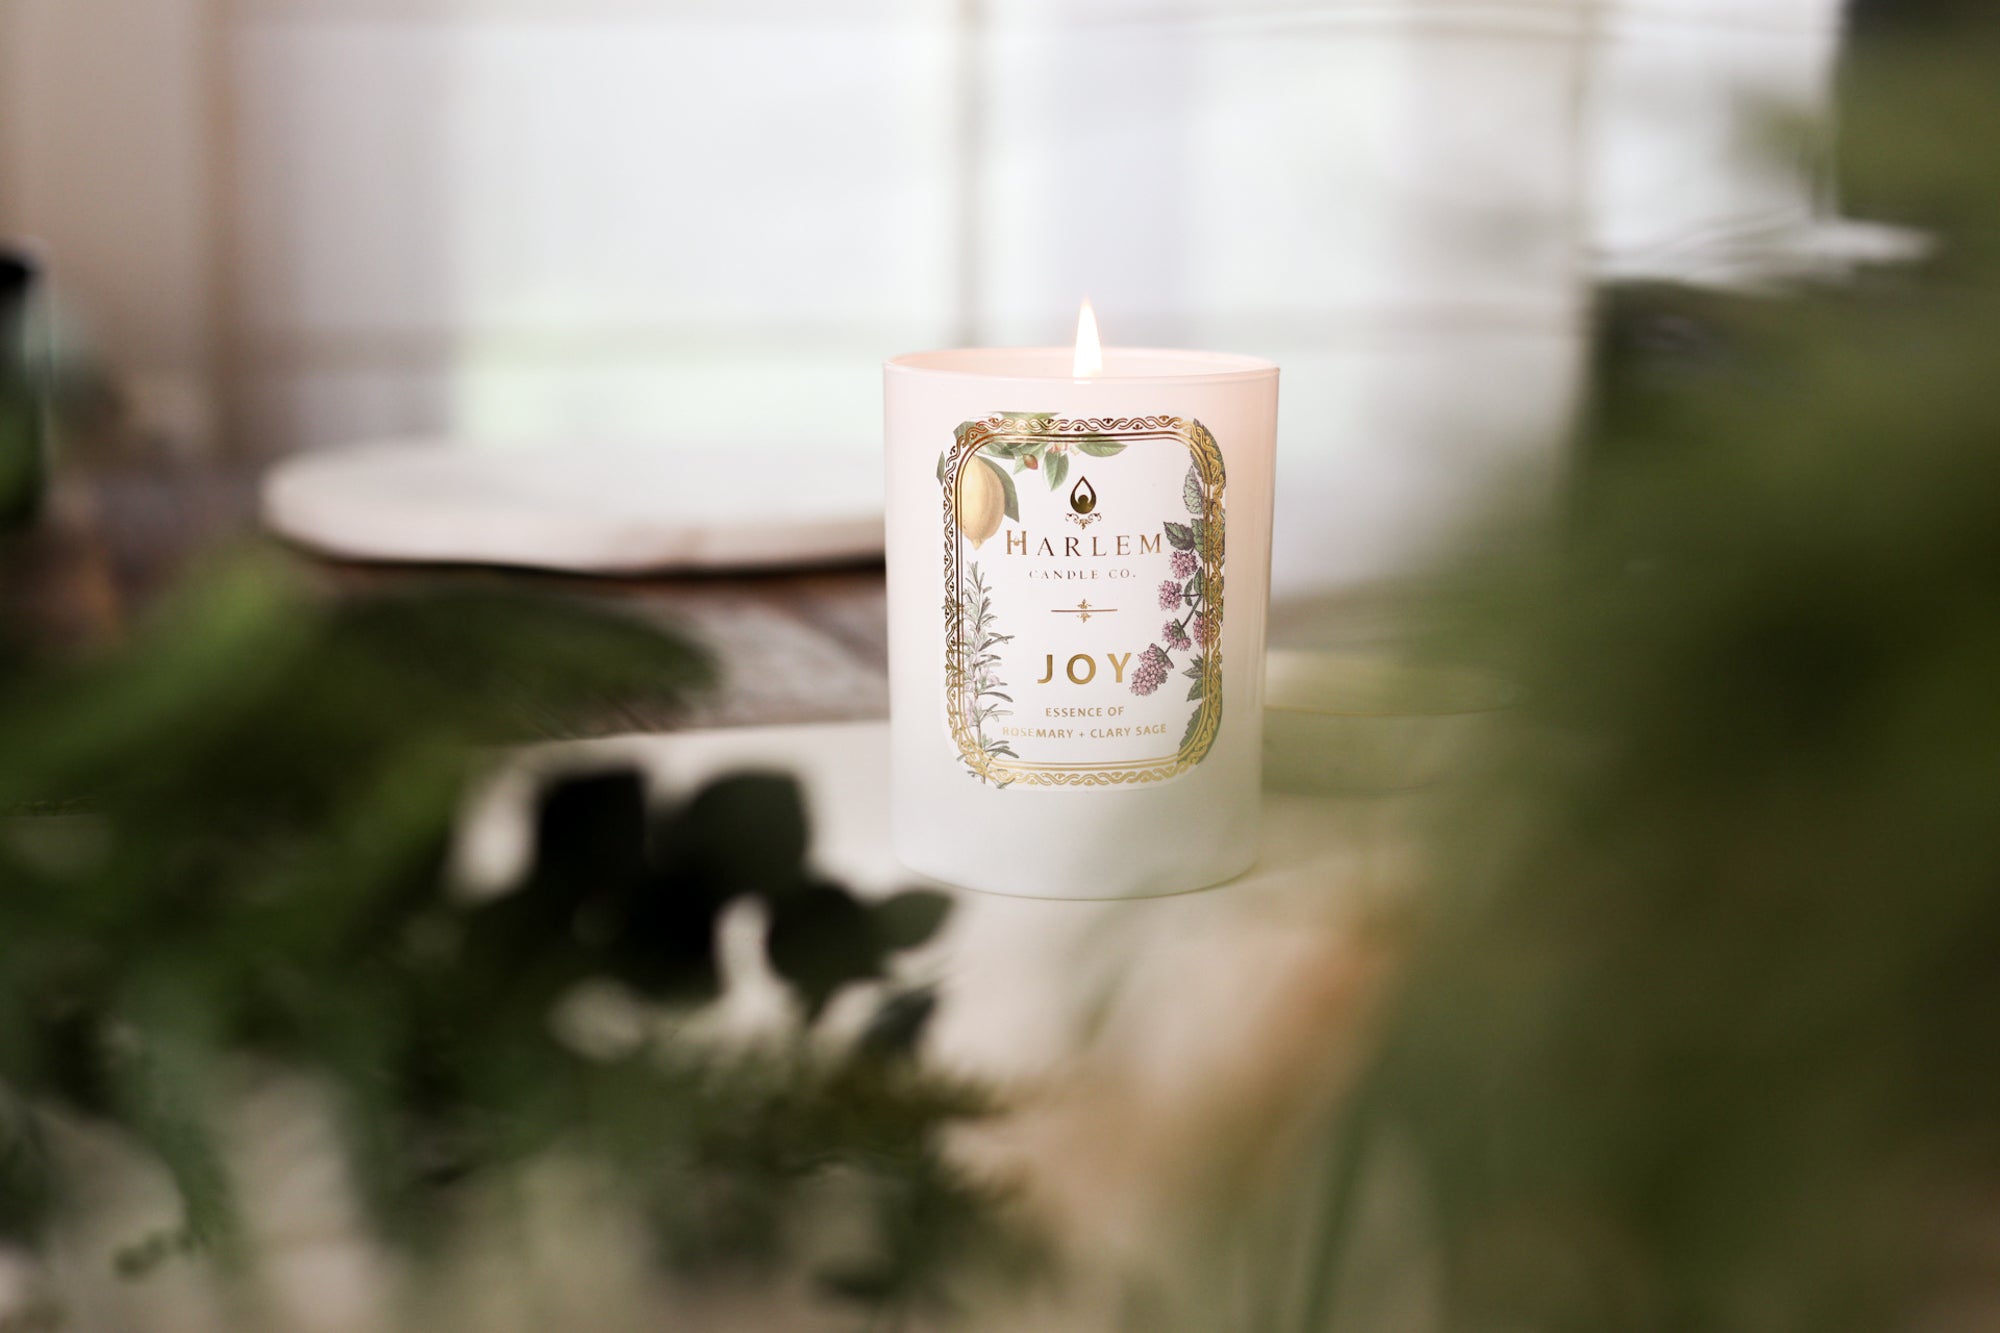 This is an image of the "Joy" Luxury Candle on a wooden table with a white place mat and greenery in the foreground.